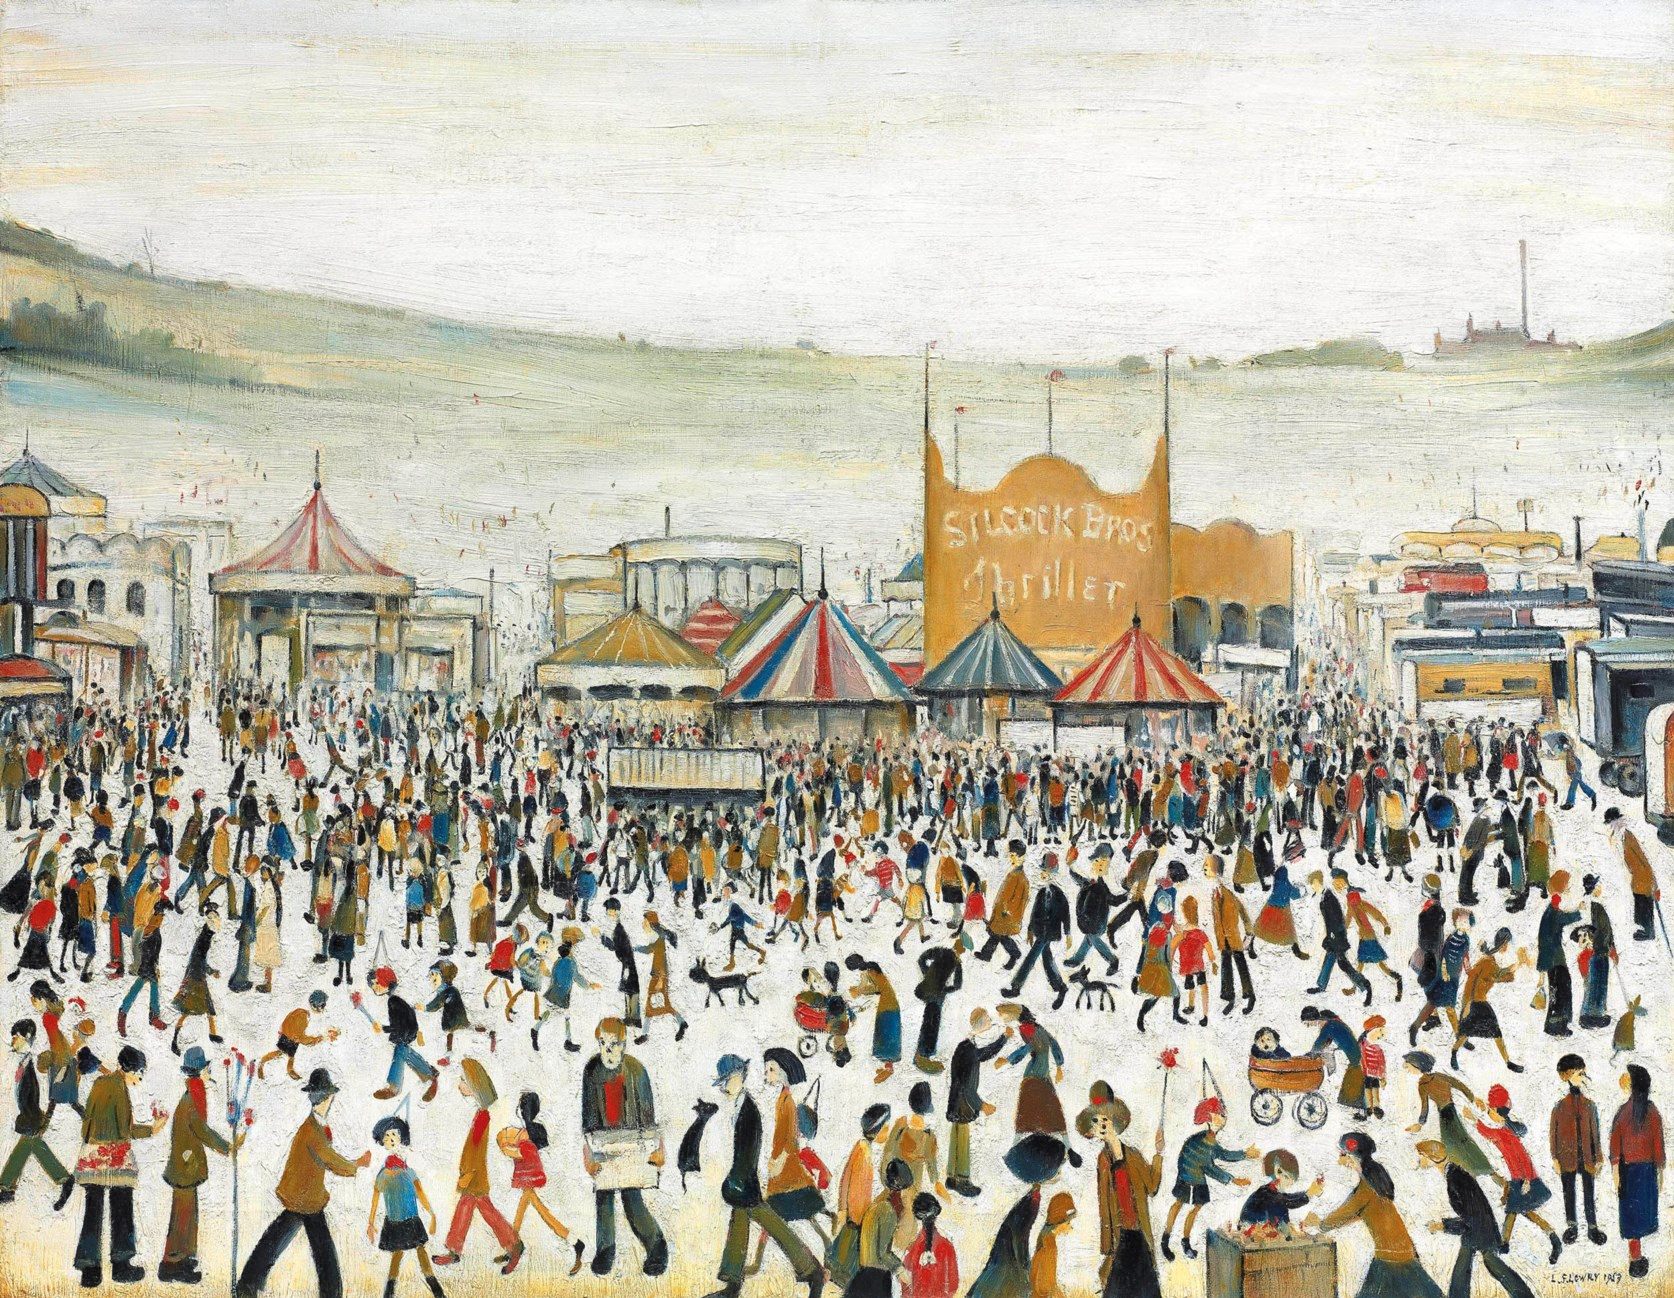 Fun Fair at Daisy Nook (1953) by Laurence Stephen Lowry (1887 - 1976), English artist.